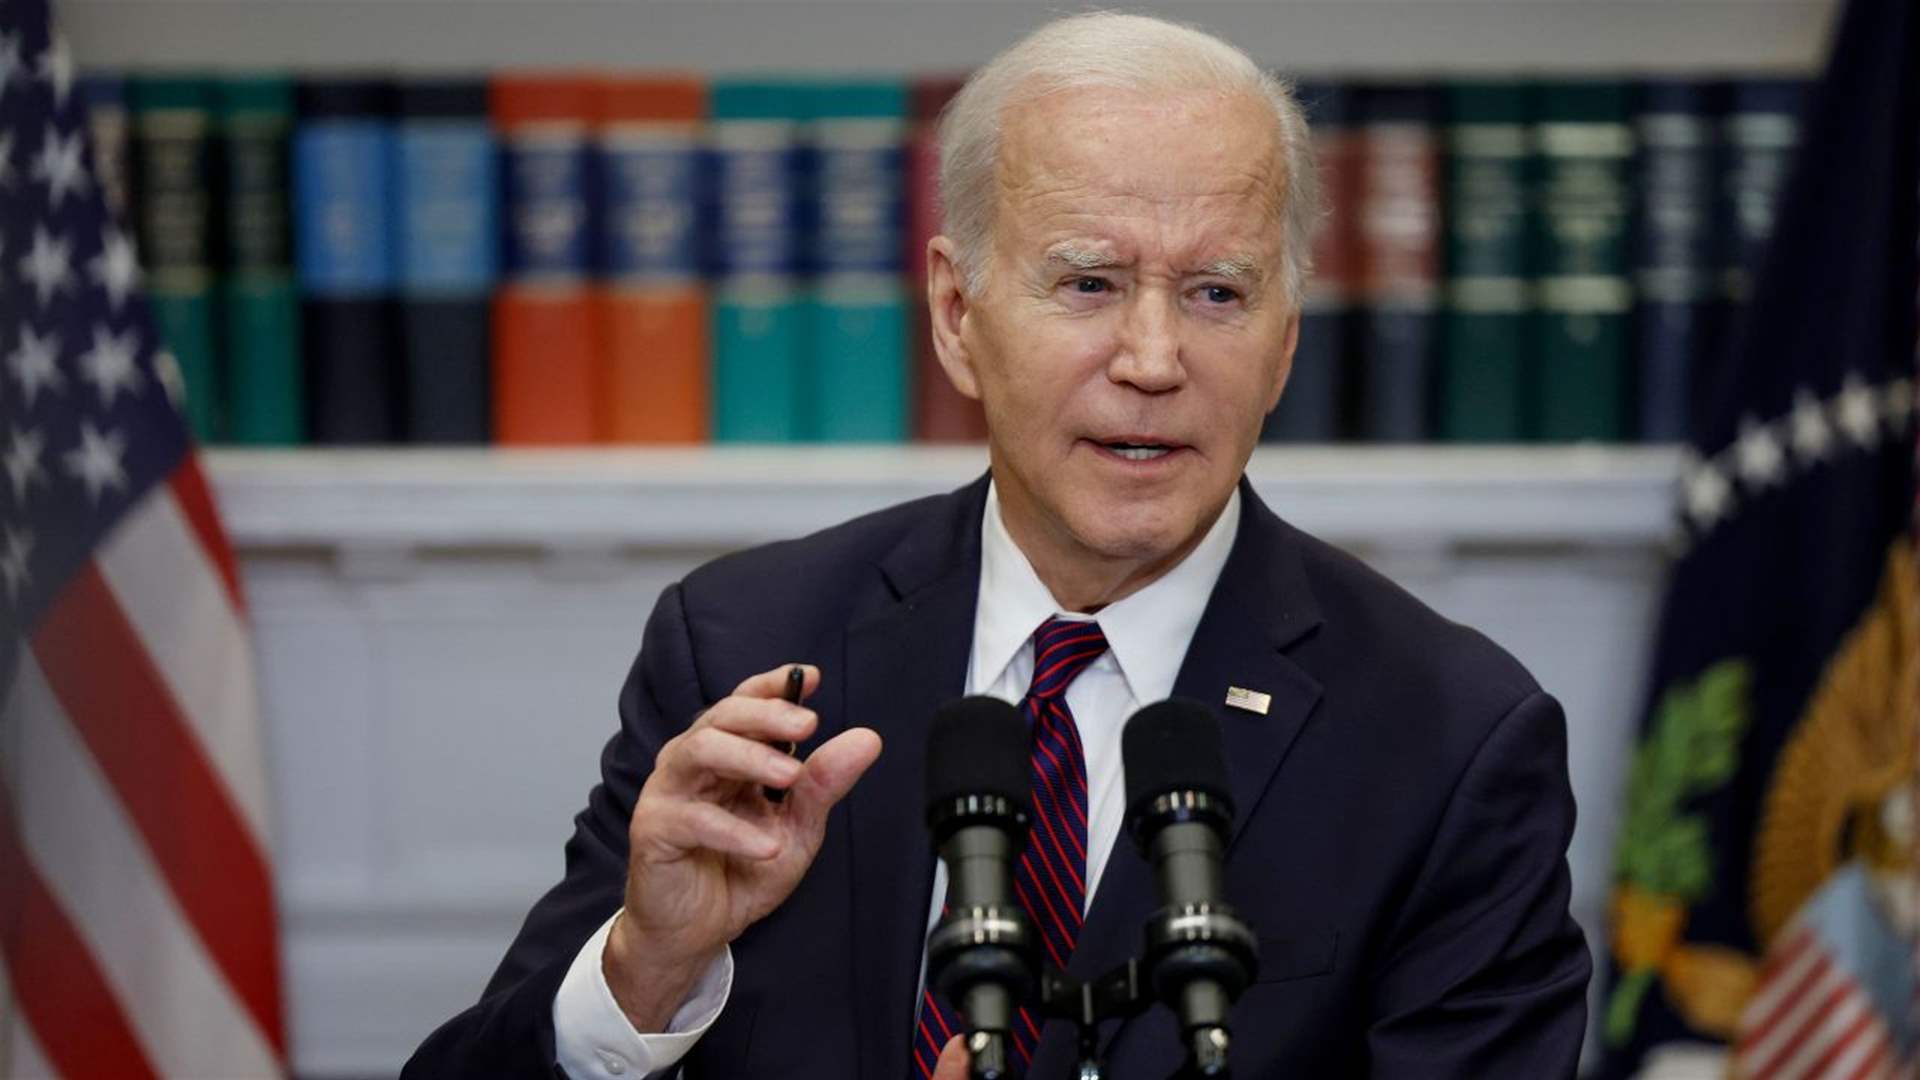 Biden: The United States delivered a special message to Iran regarding the Houthi attacks